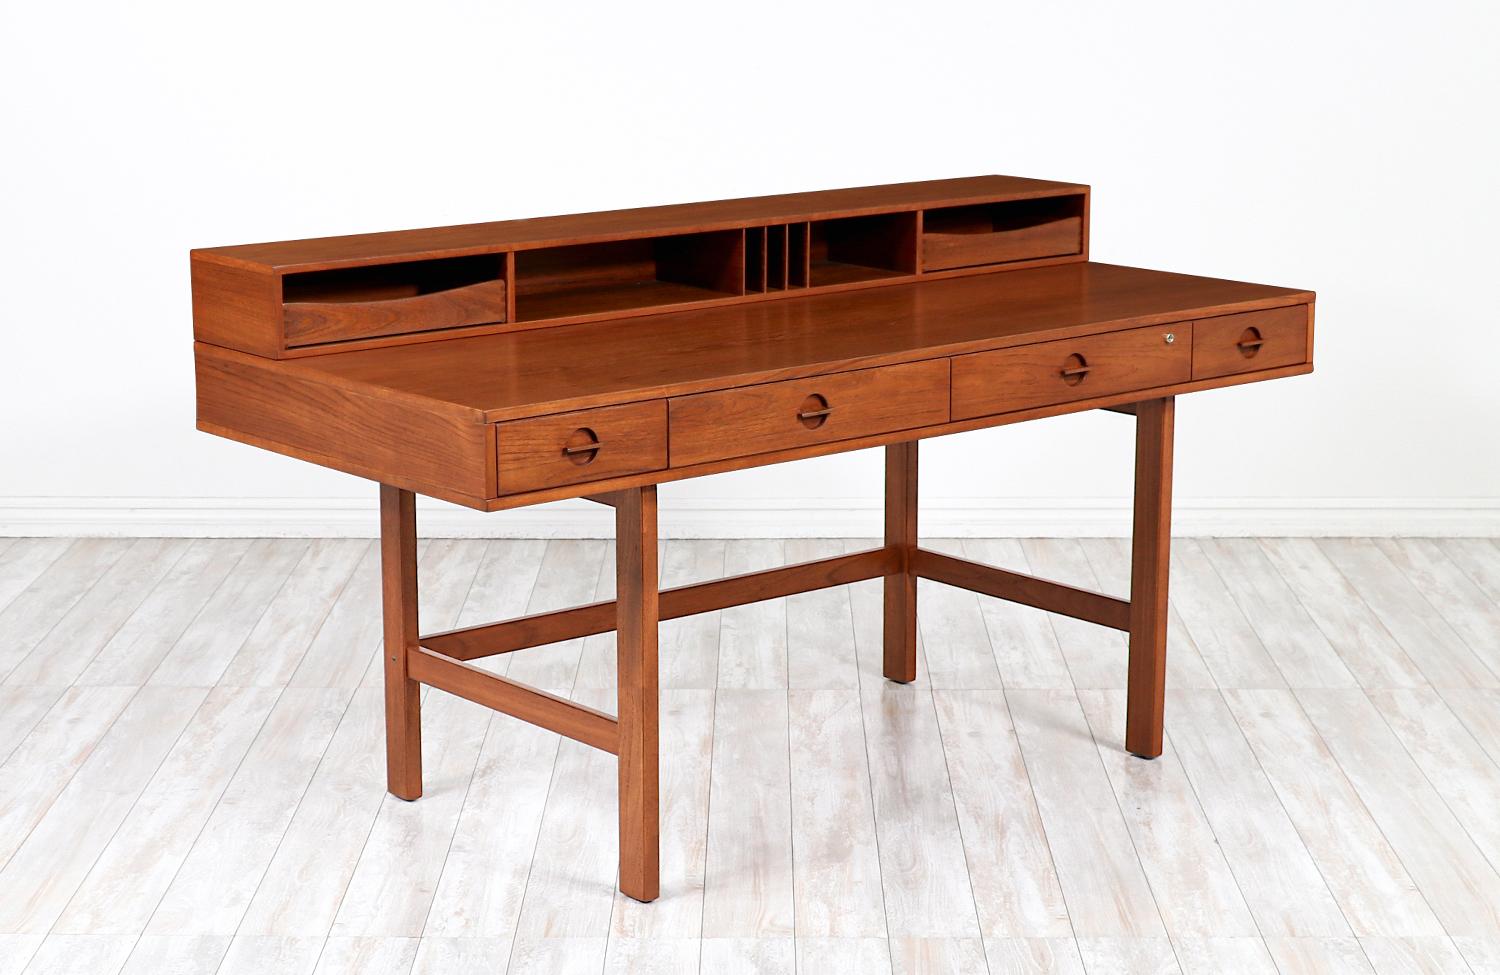 Spectacular teak desk designed and crafted by Peter Løvig Nielsen in Denmark circa 1970's. Its ingenious design makes it versatile in accommodating two-persons on each side by simply flipping the top shelf and having the top removable drawers